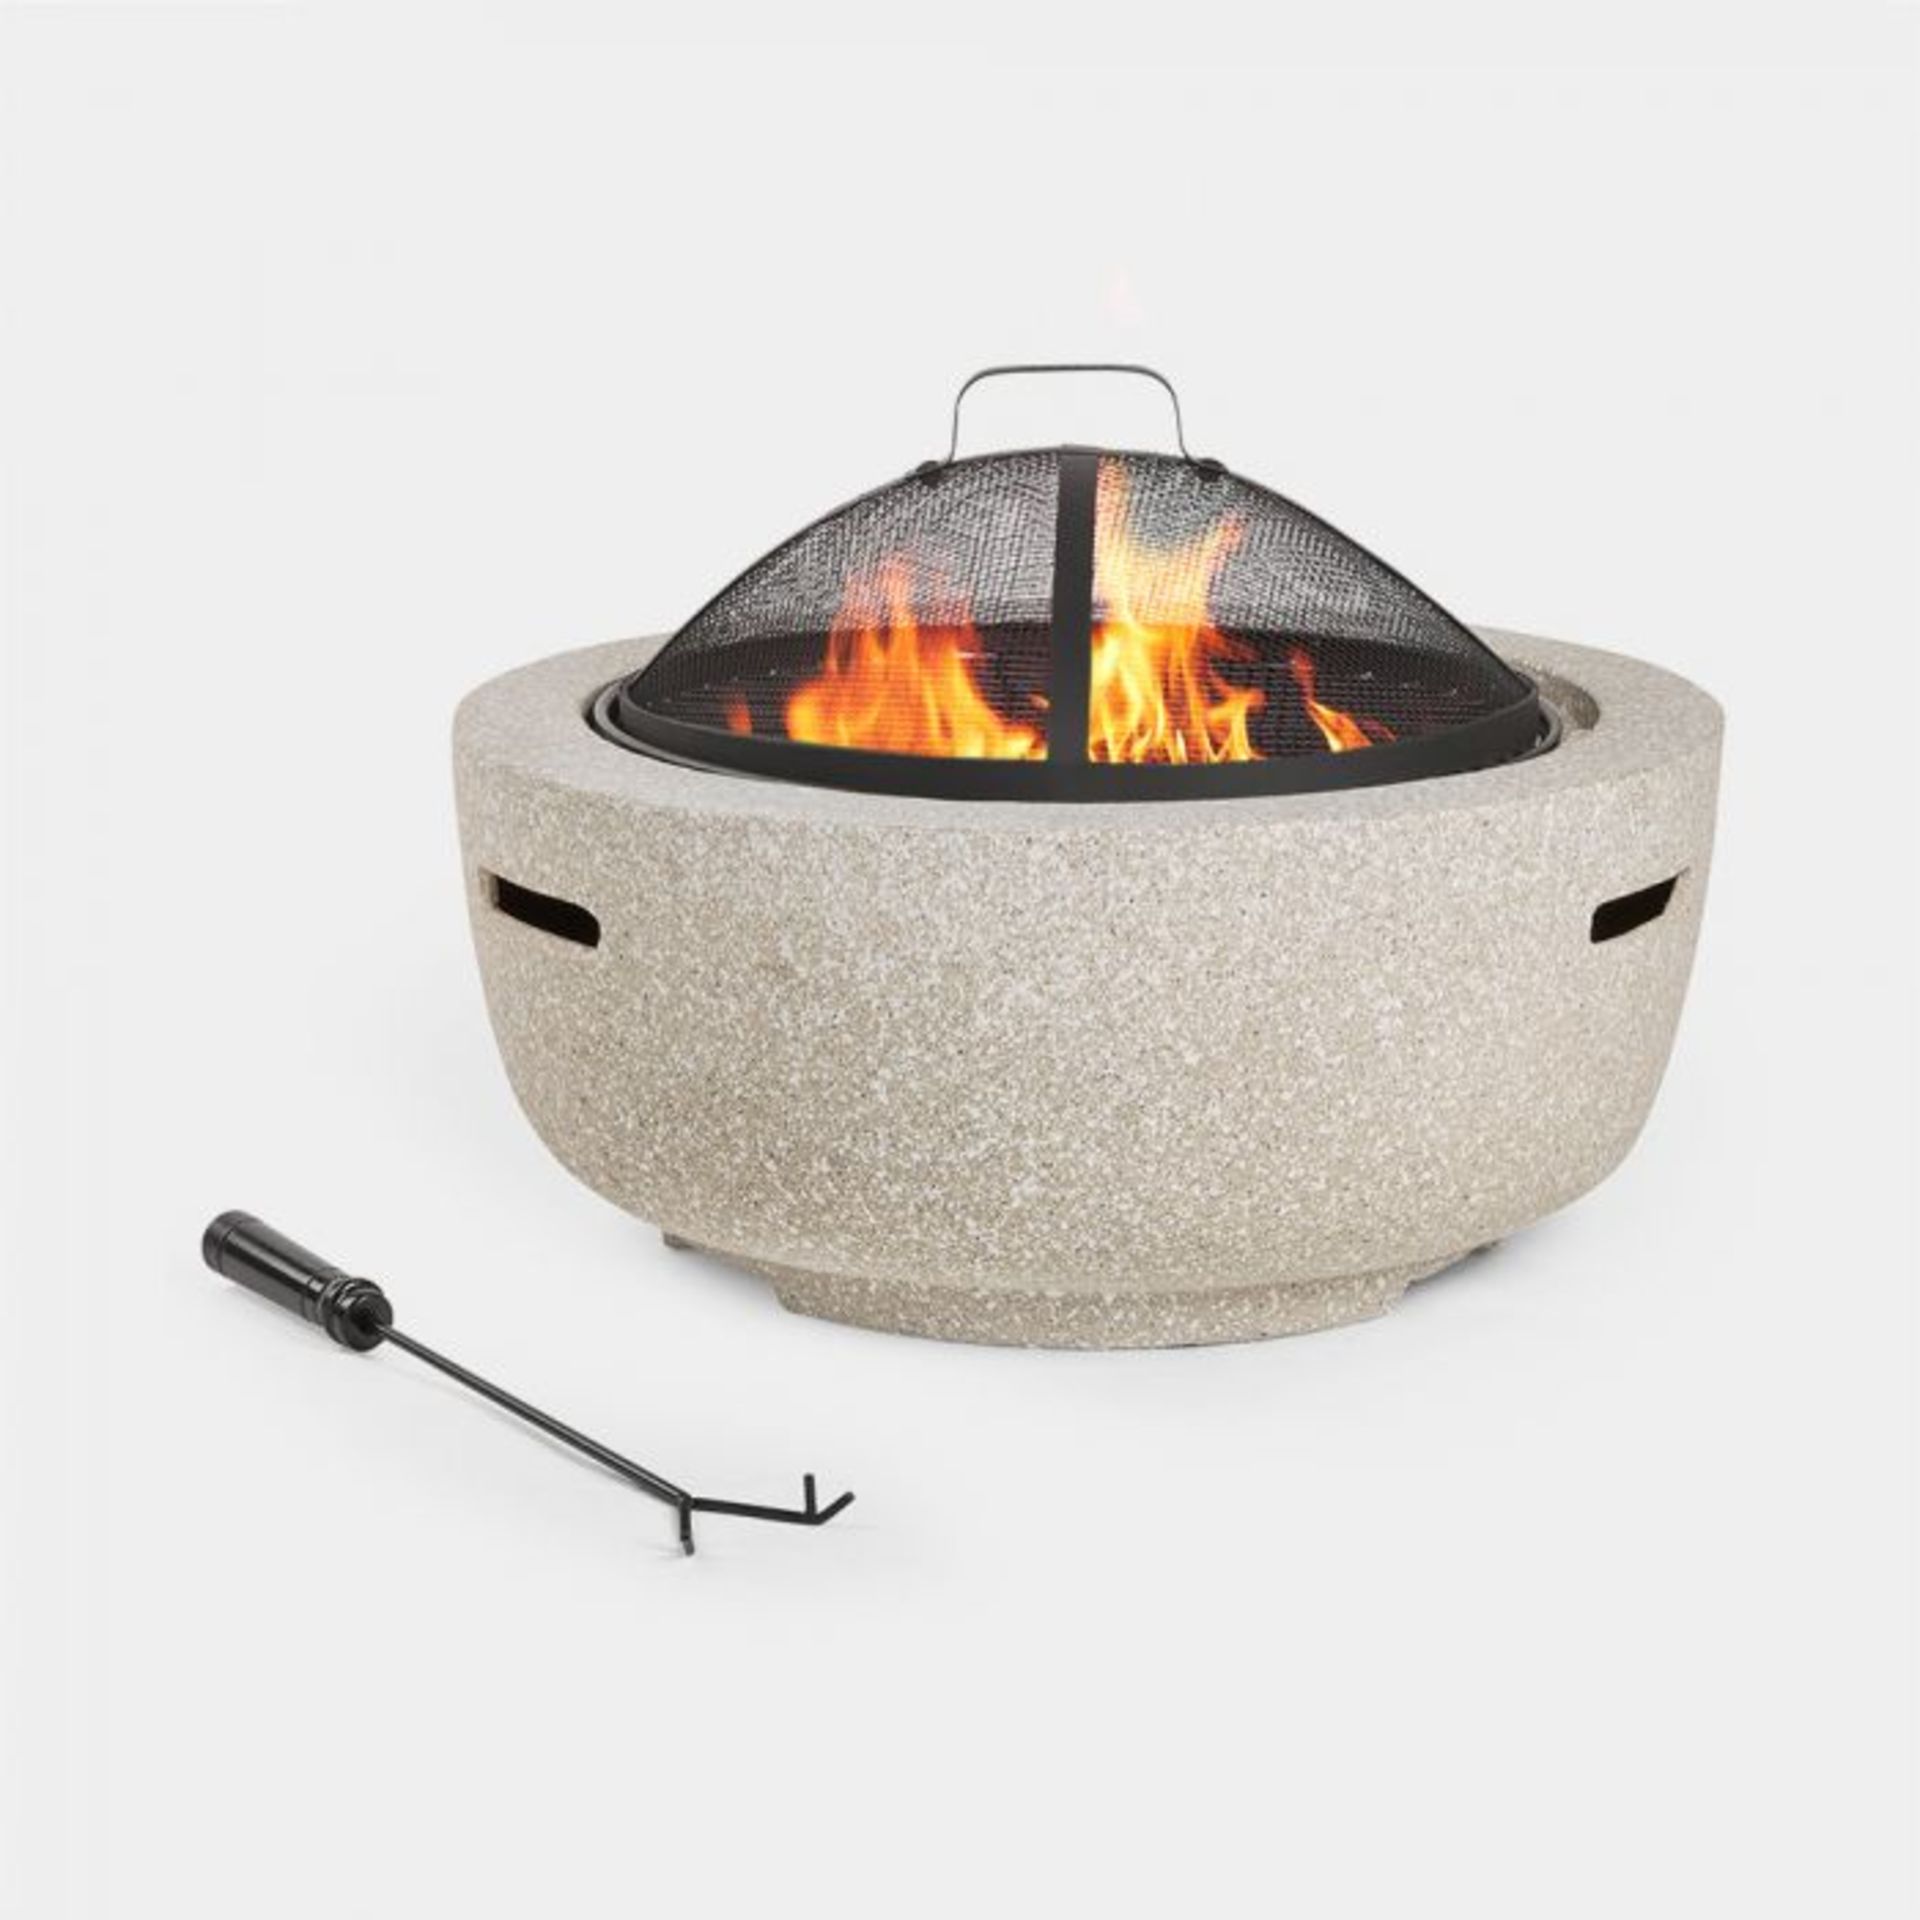 Round MgO Fire Pit. Plump for a versatile brazier/barbecue hybrid – like our stylish, self-contained